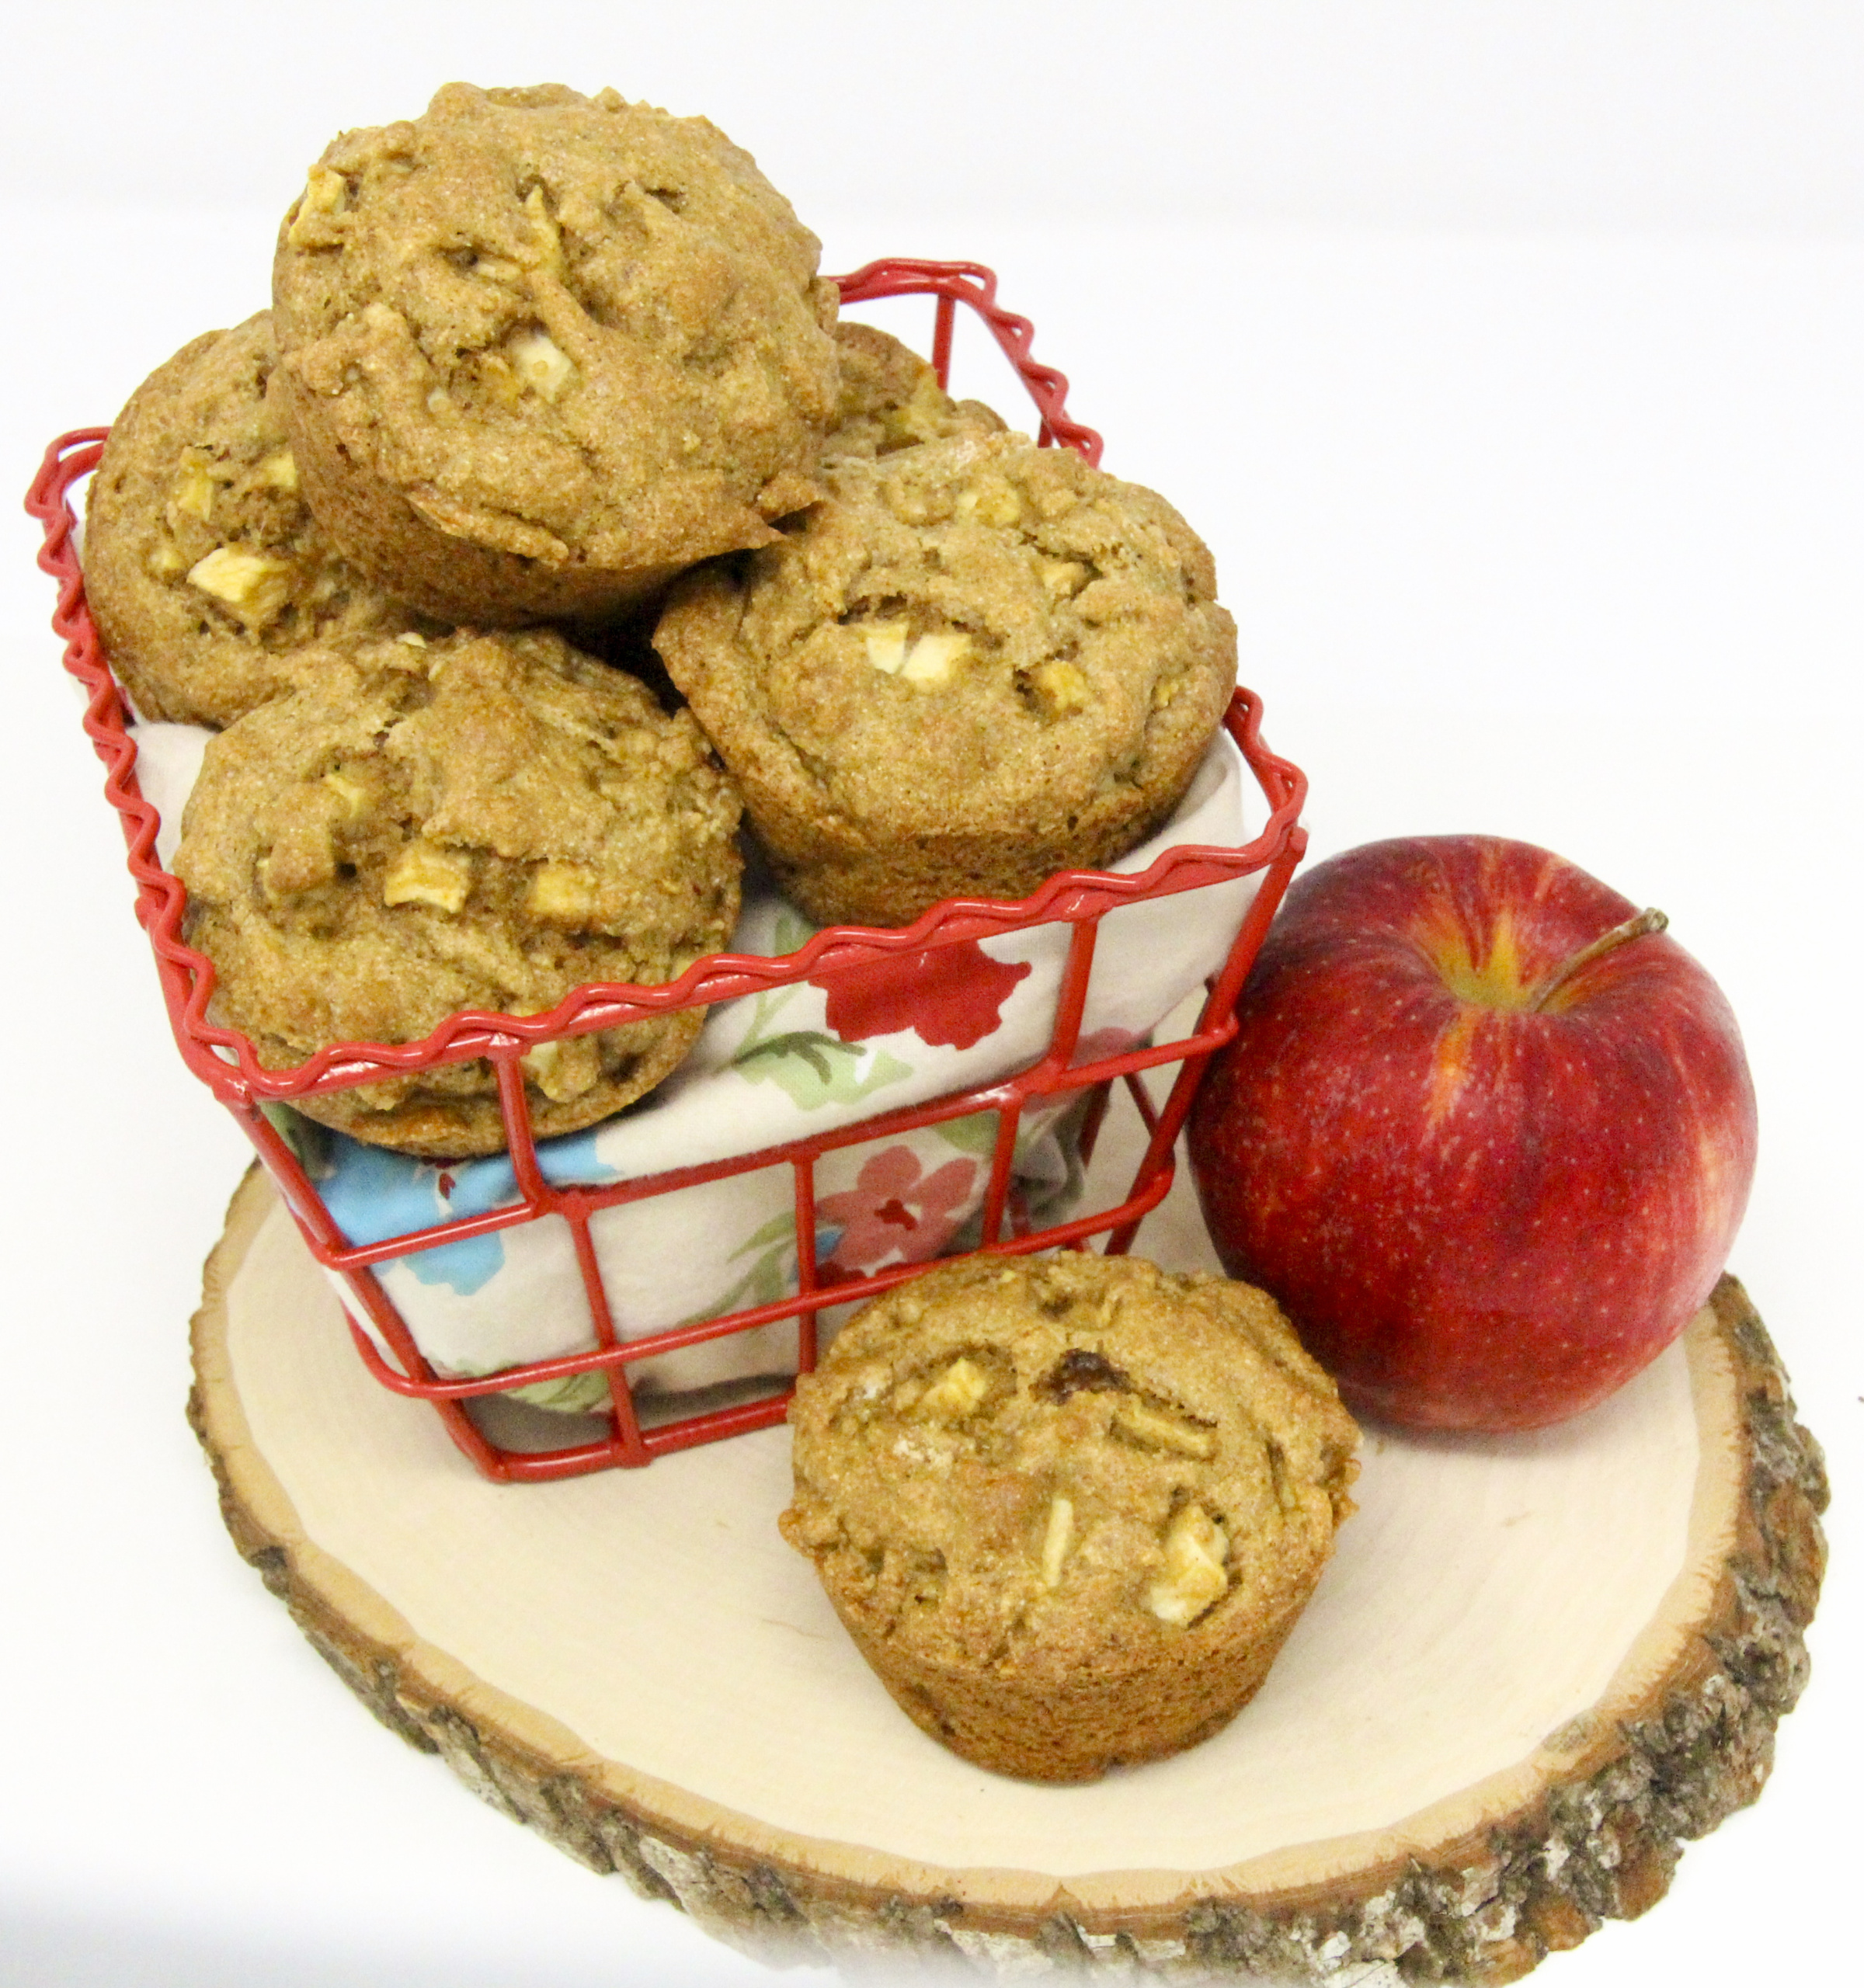 Cinnamon and nutmeg provides warming flavors while apples add a nice moistness to complement the 100% whole wheat flour Apple Spice Muffins. Recipe shared with permission granted by Maddie Day, author of MURDER AT THE LOBSTAH SHACK.